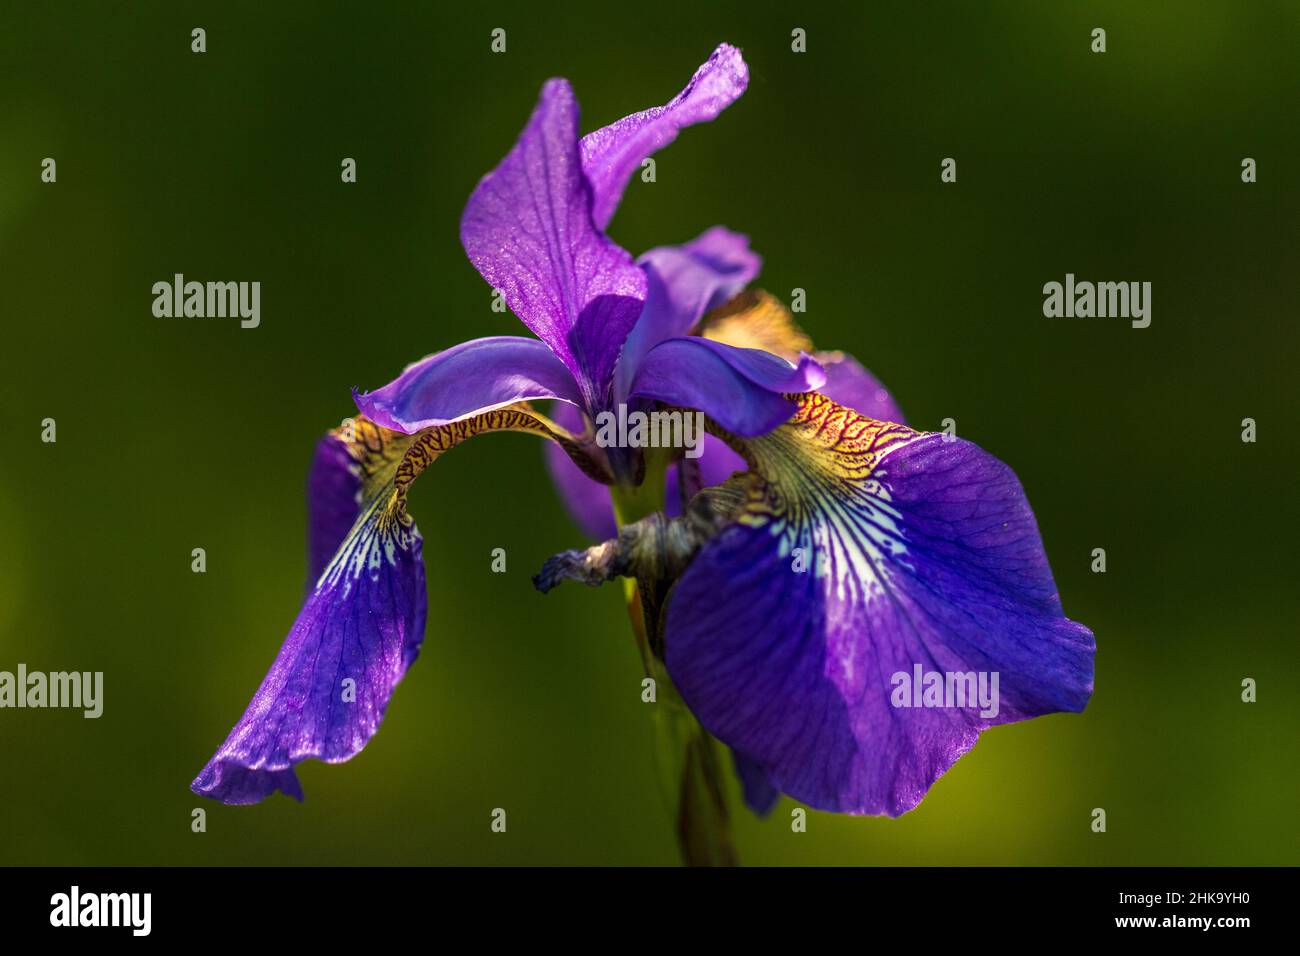 Violet iris flower on a green background. Stock Photo